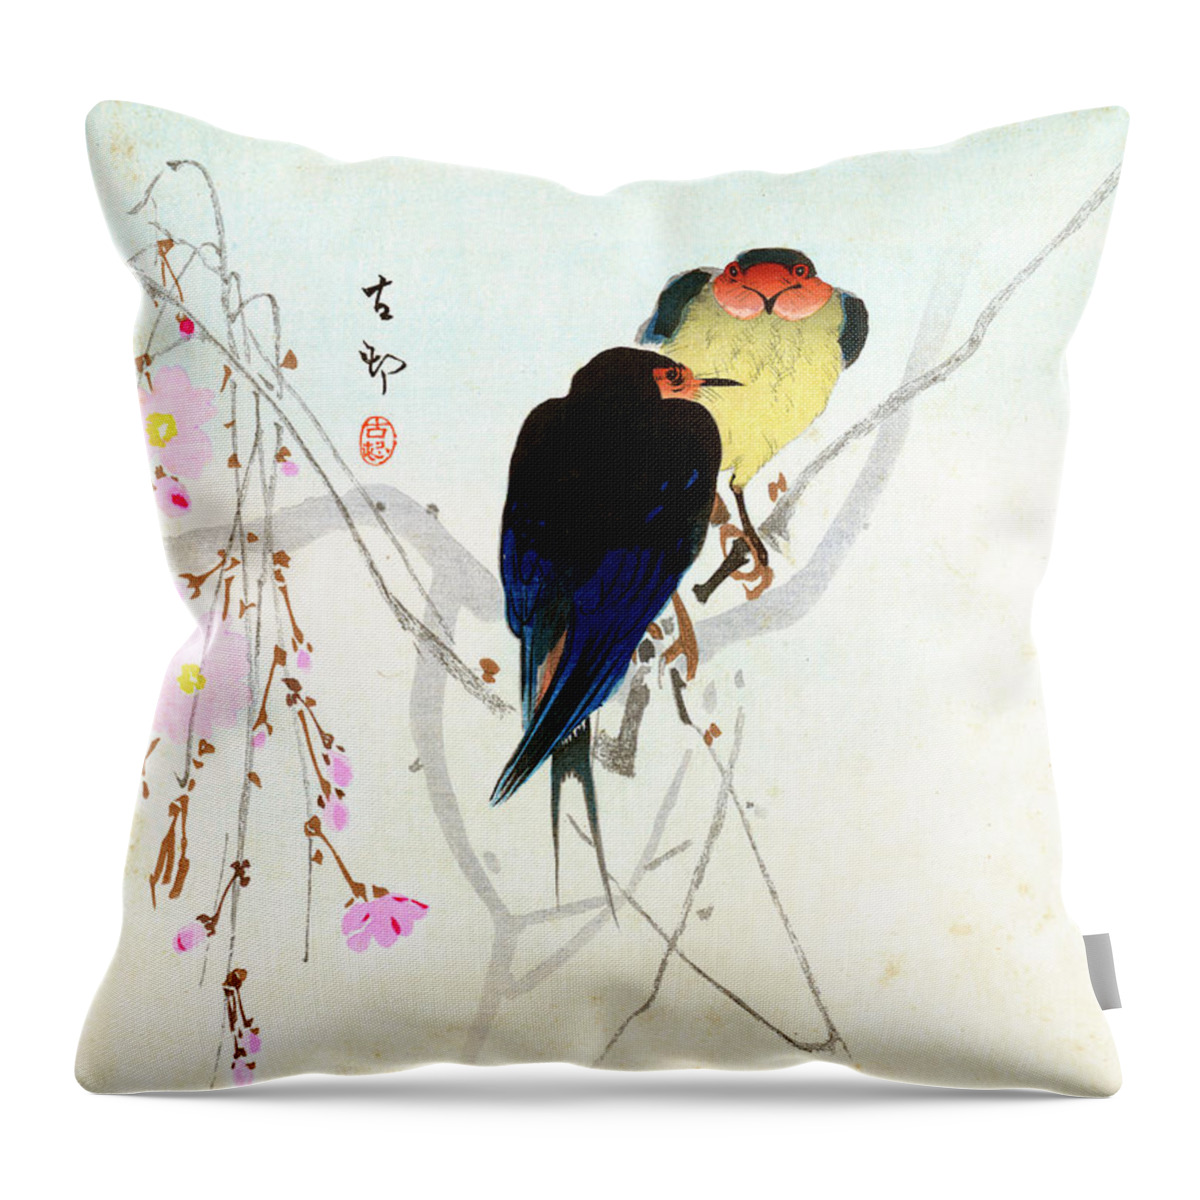 Japan Throw Pillow featuring the painting Swallow by Koson